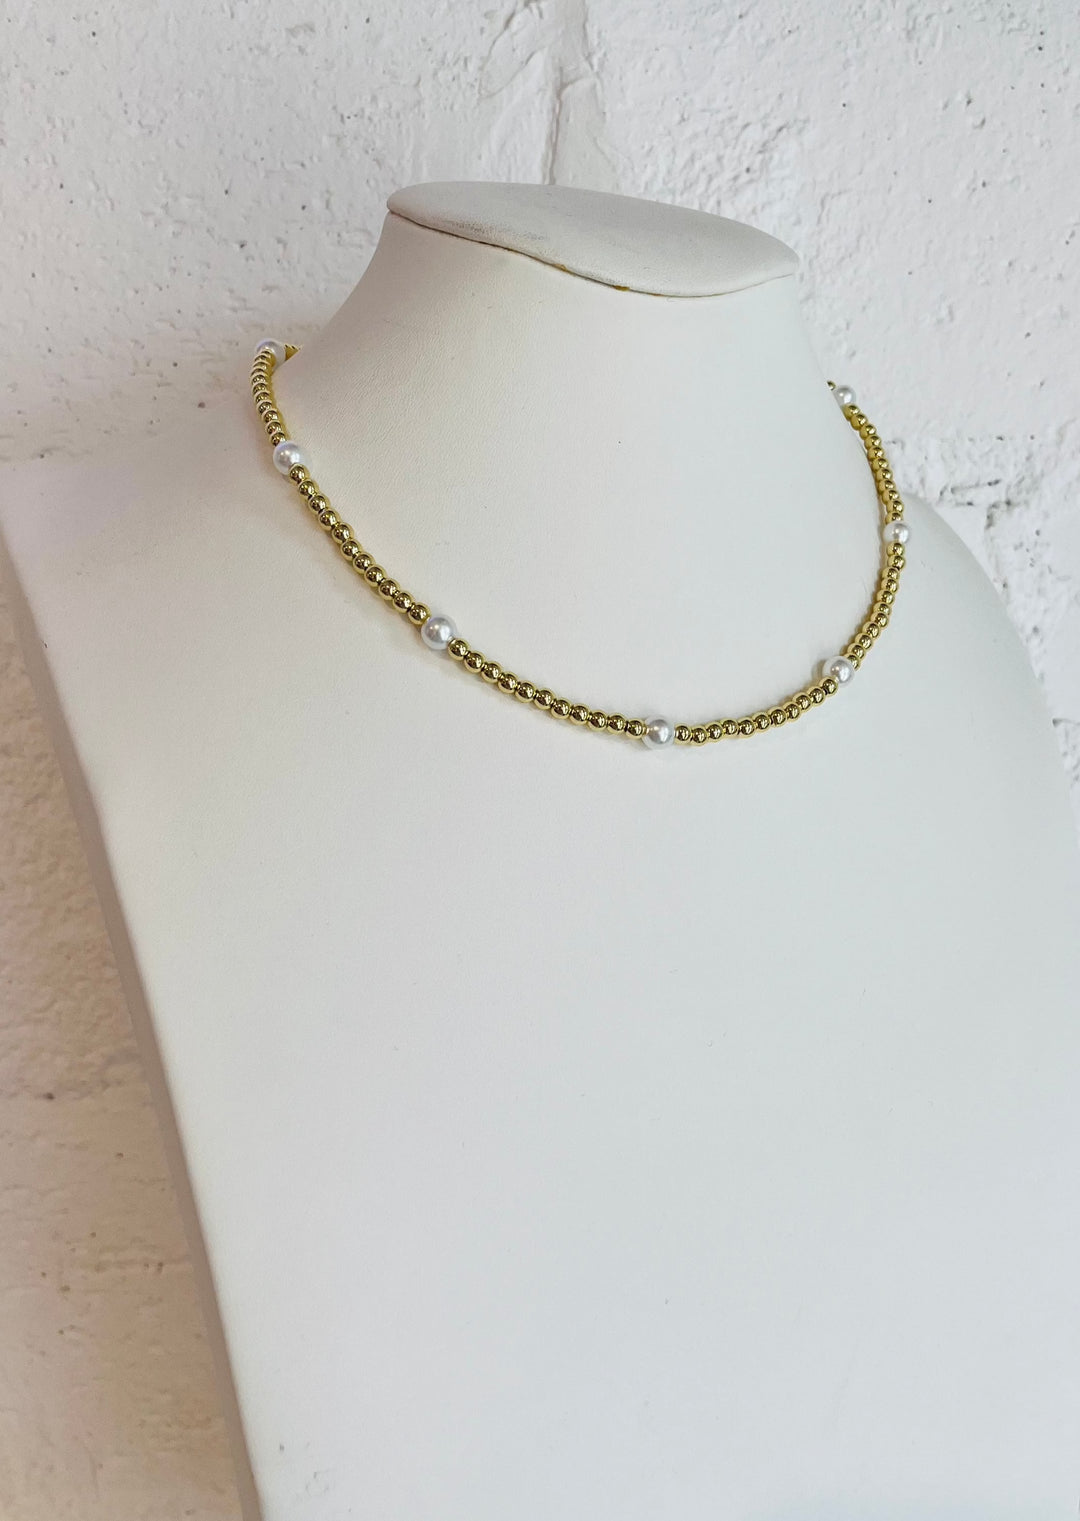 Stainless Steel Gold Necklace with Pearls, Jewelry, Adeline, Adeline, dallas boutique, dallas texas, texas boutique, women's boutique dallas, adeline boutique, dallas boutique, trendy boutique, affordable boutique